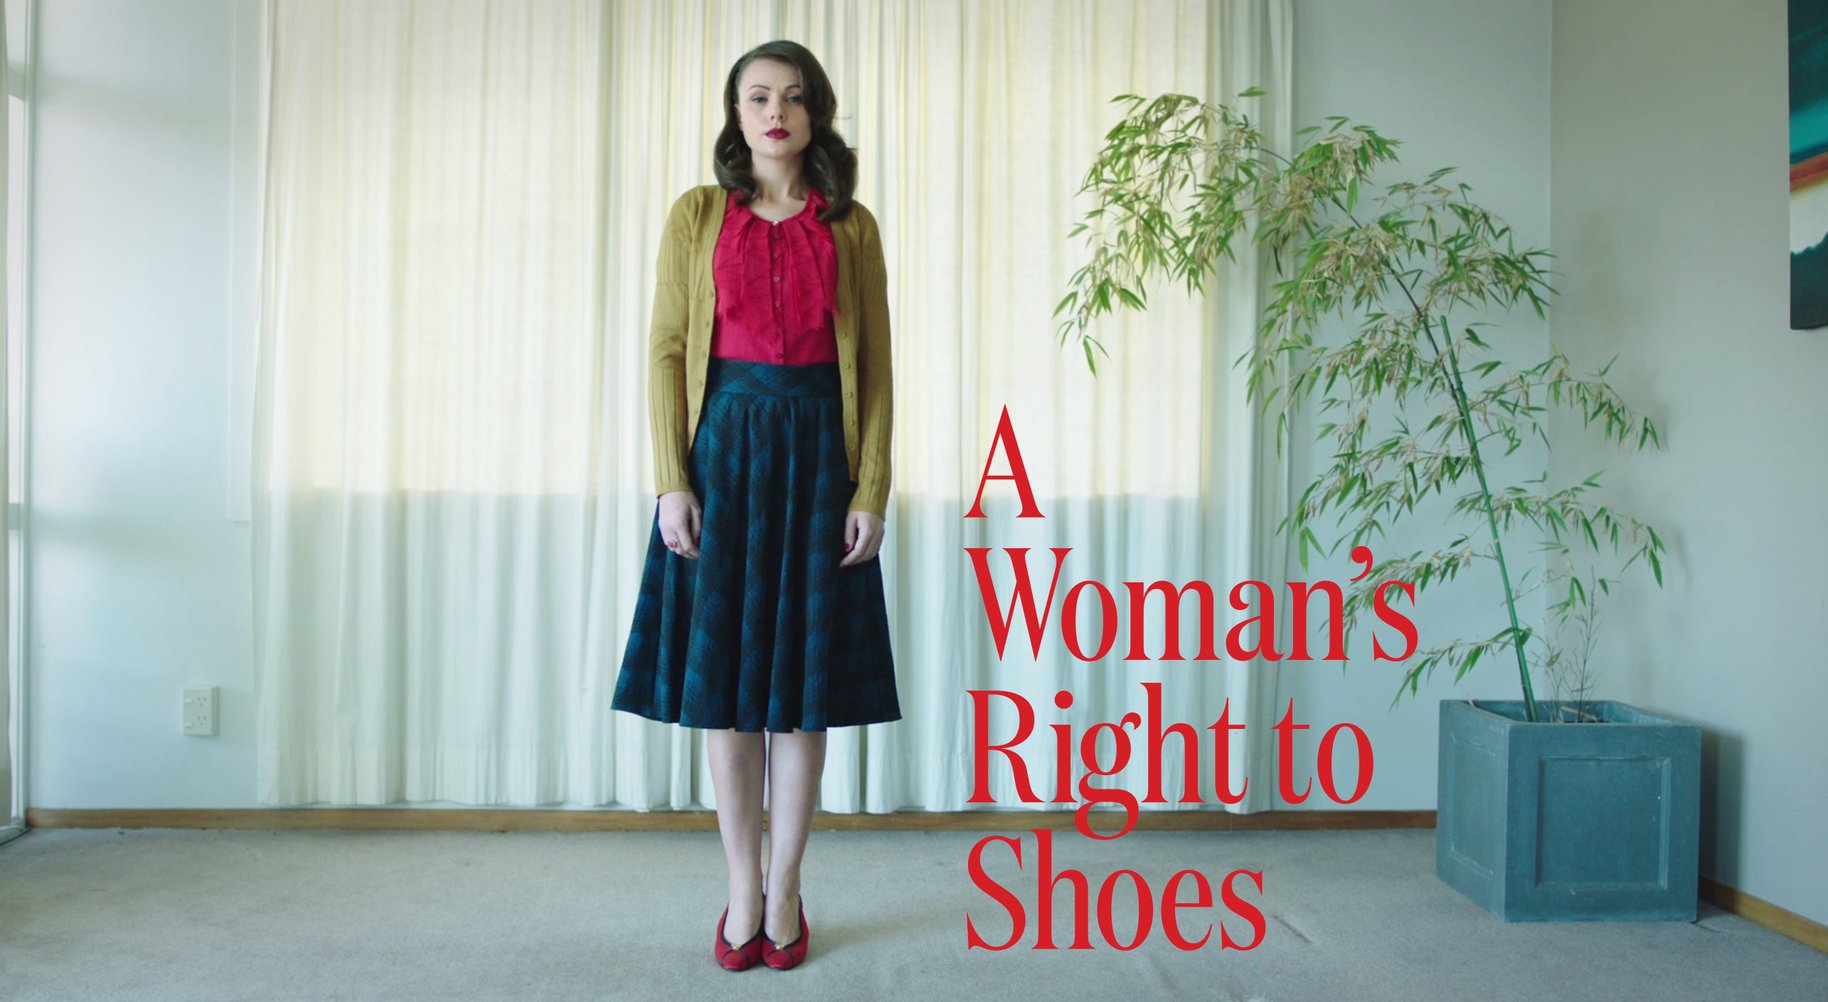 A Woman's Right To Shoes Film Opening Title